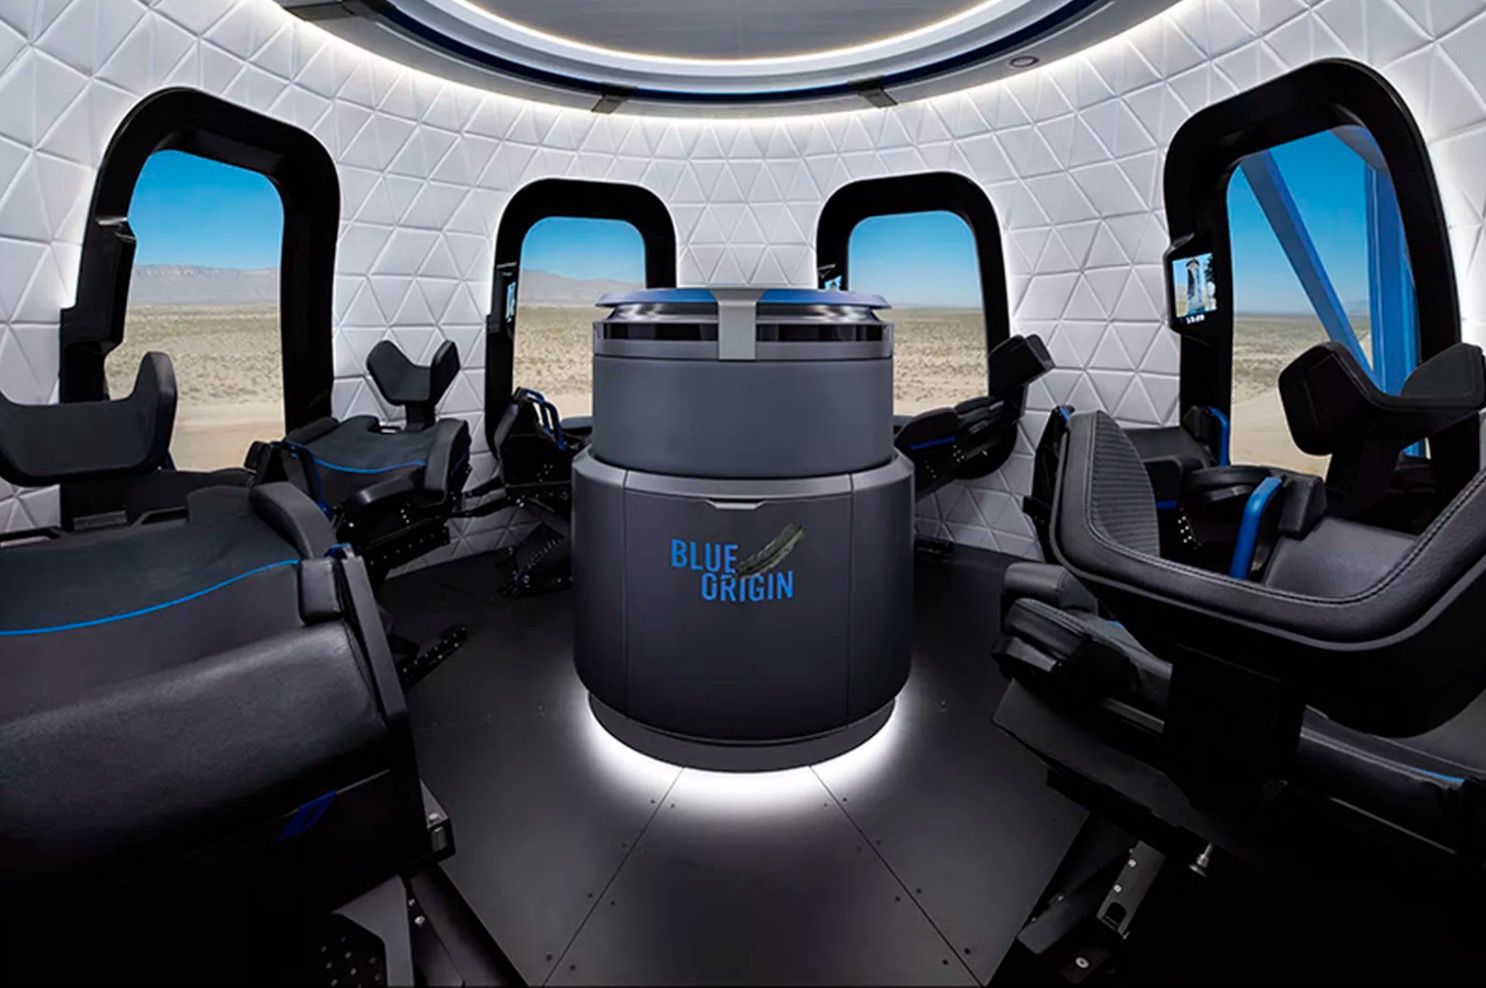 blue origin shows off first interior photos of its tourist space rocket image 1